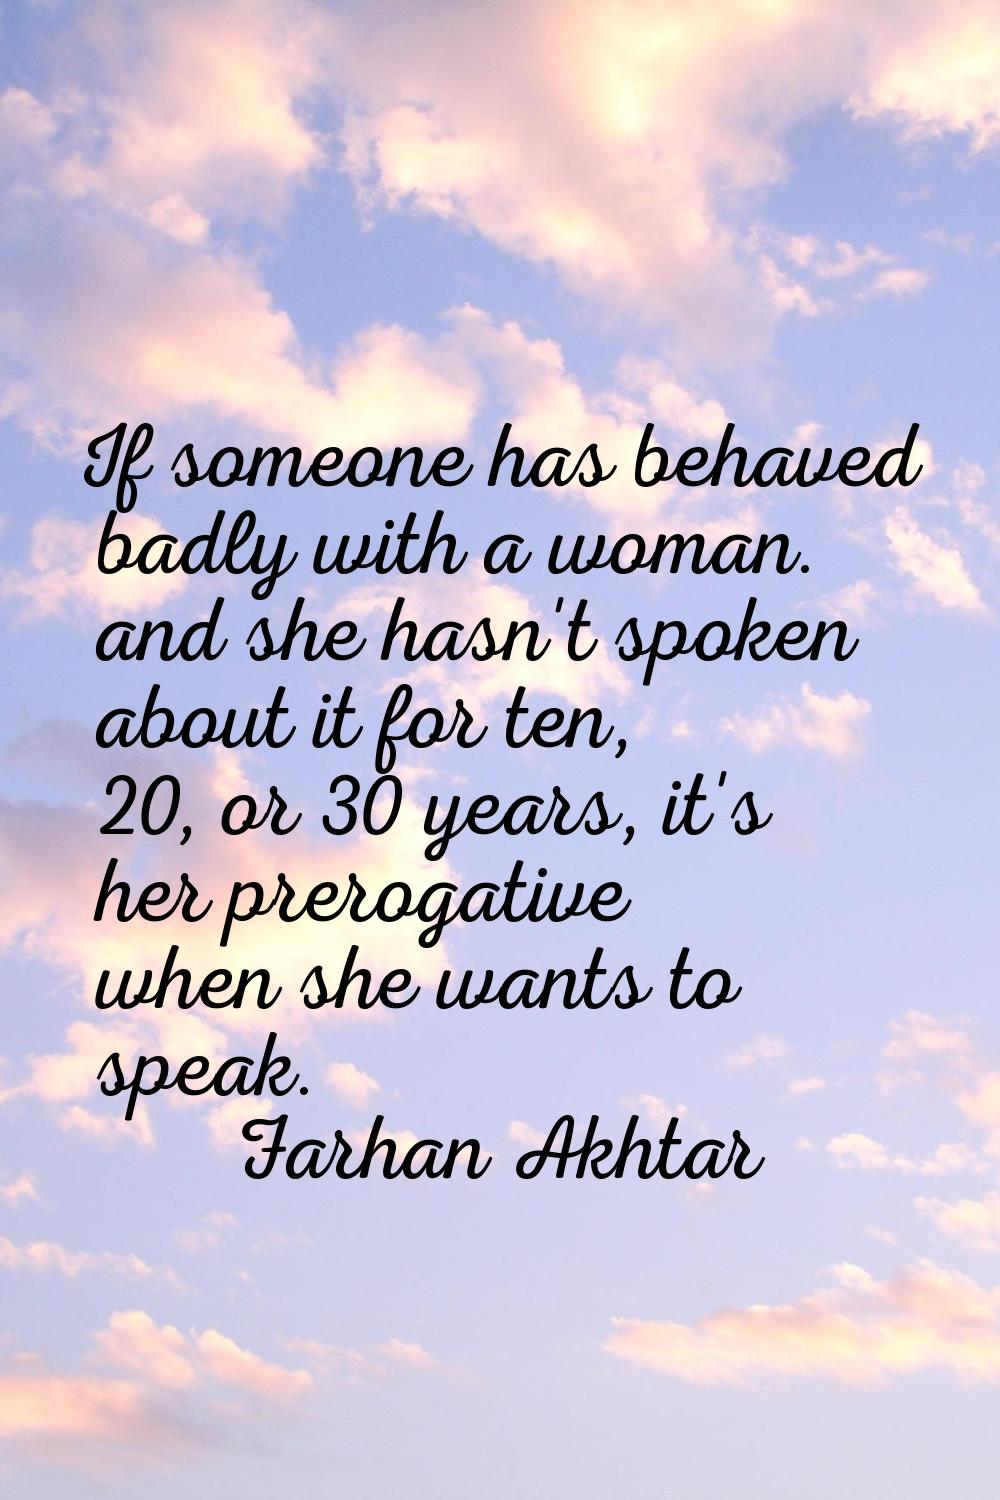 If someone has behaved badly with a woman. and she hasn't spoken about it for ten, 20, or 30 years,